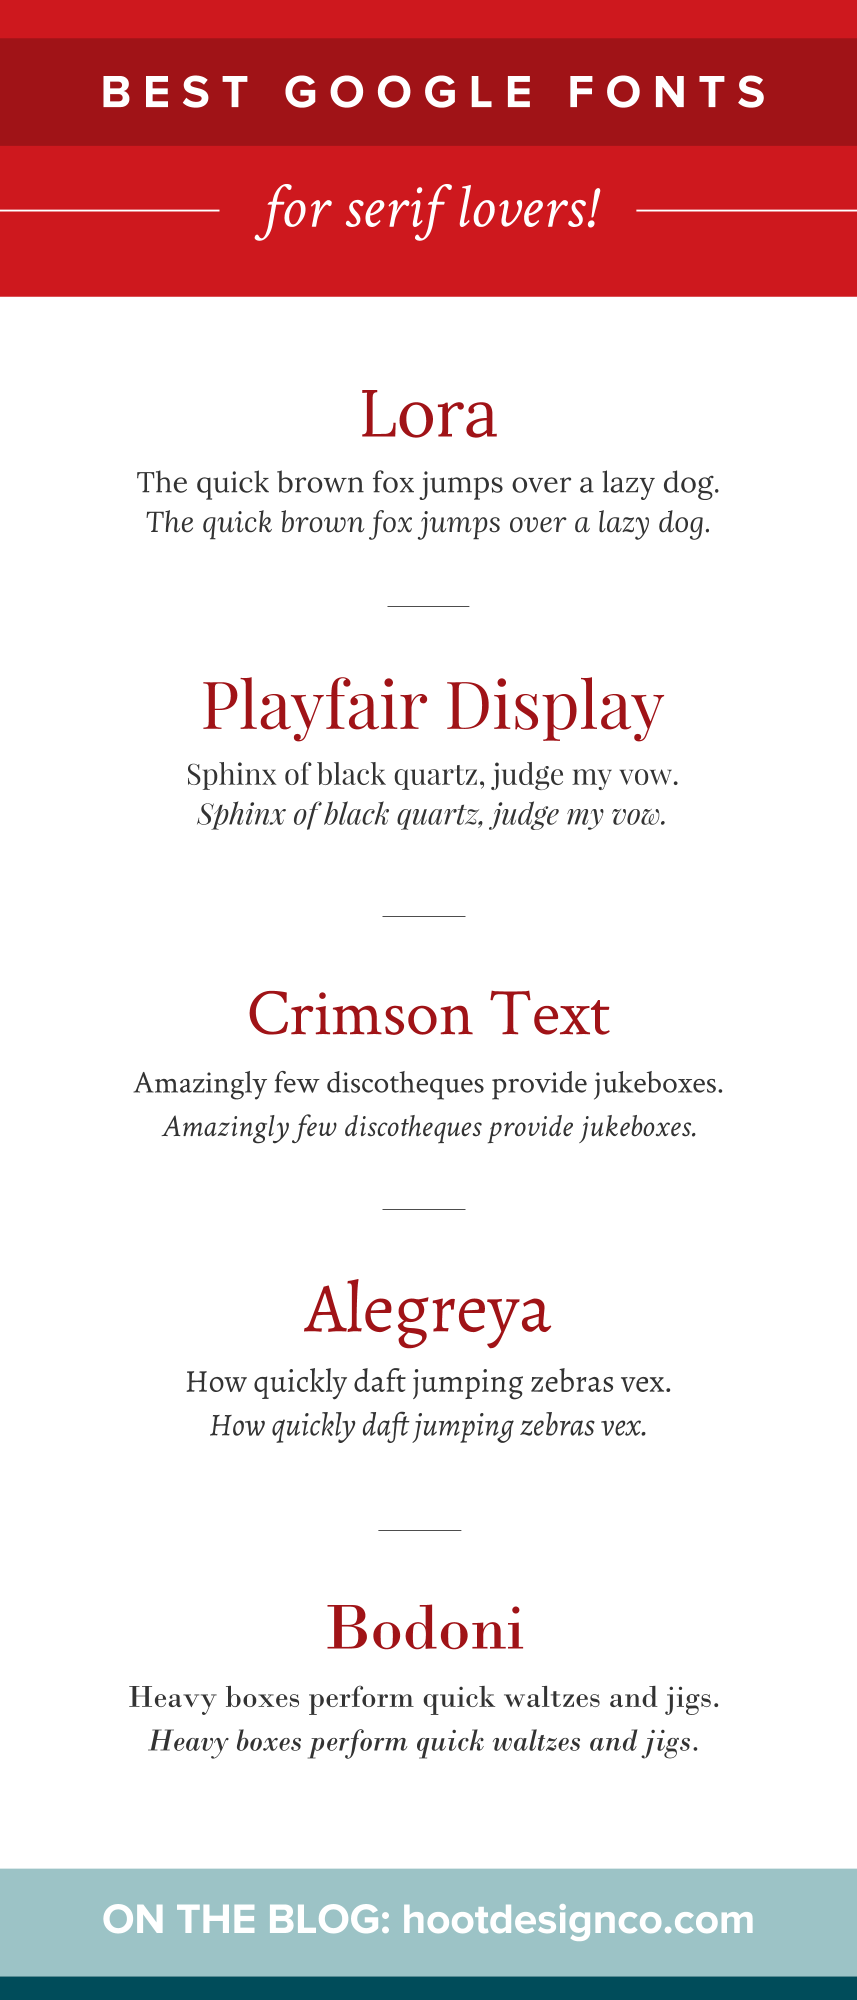 Our+fave+serif+Google+fonts+–%C2%A0free+to+use!+We+love+these+because+they're+super+readable,+pleasantly+balanced,+and+have+great+true+italics.+Super+love.png